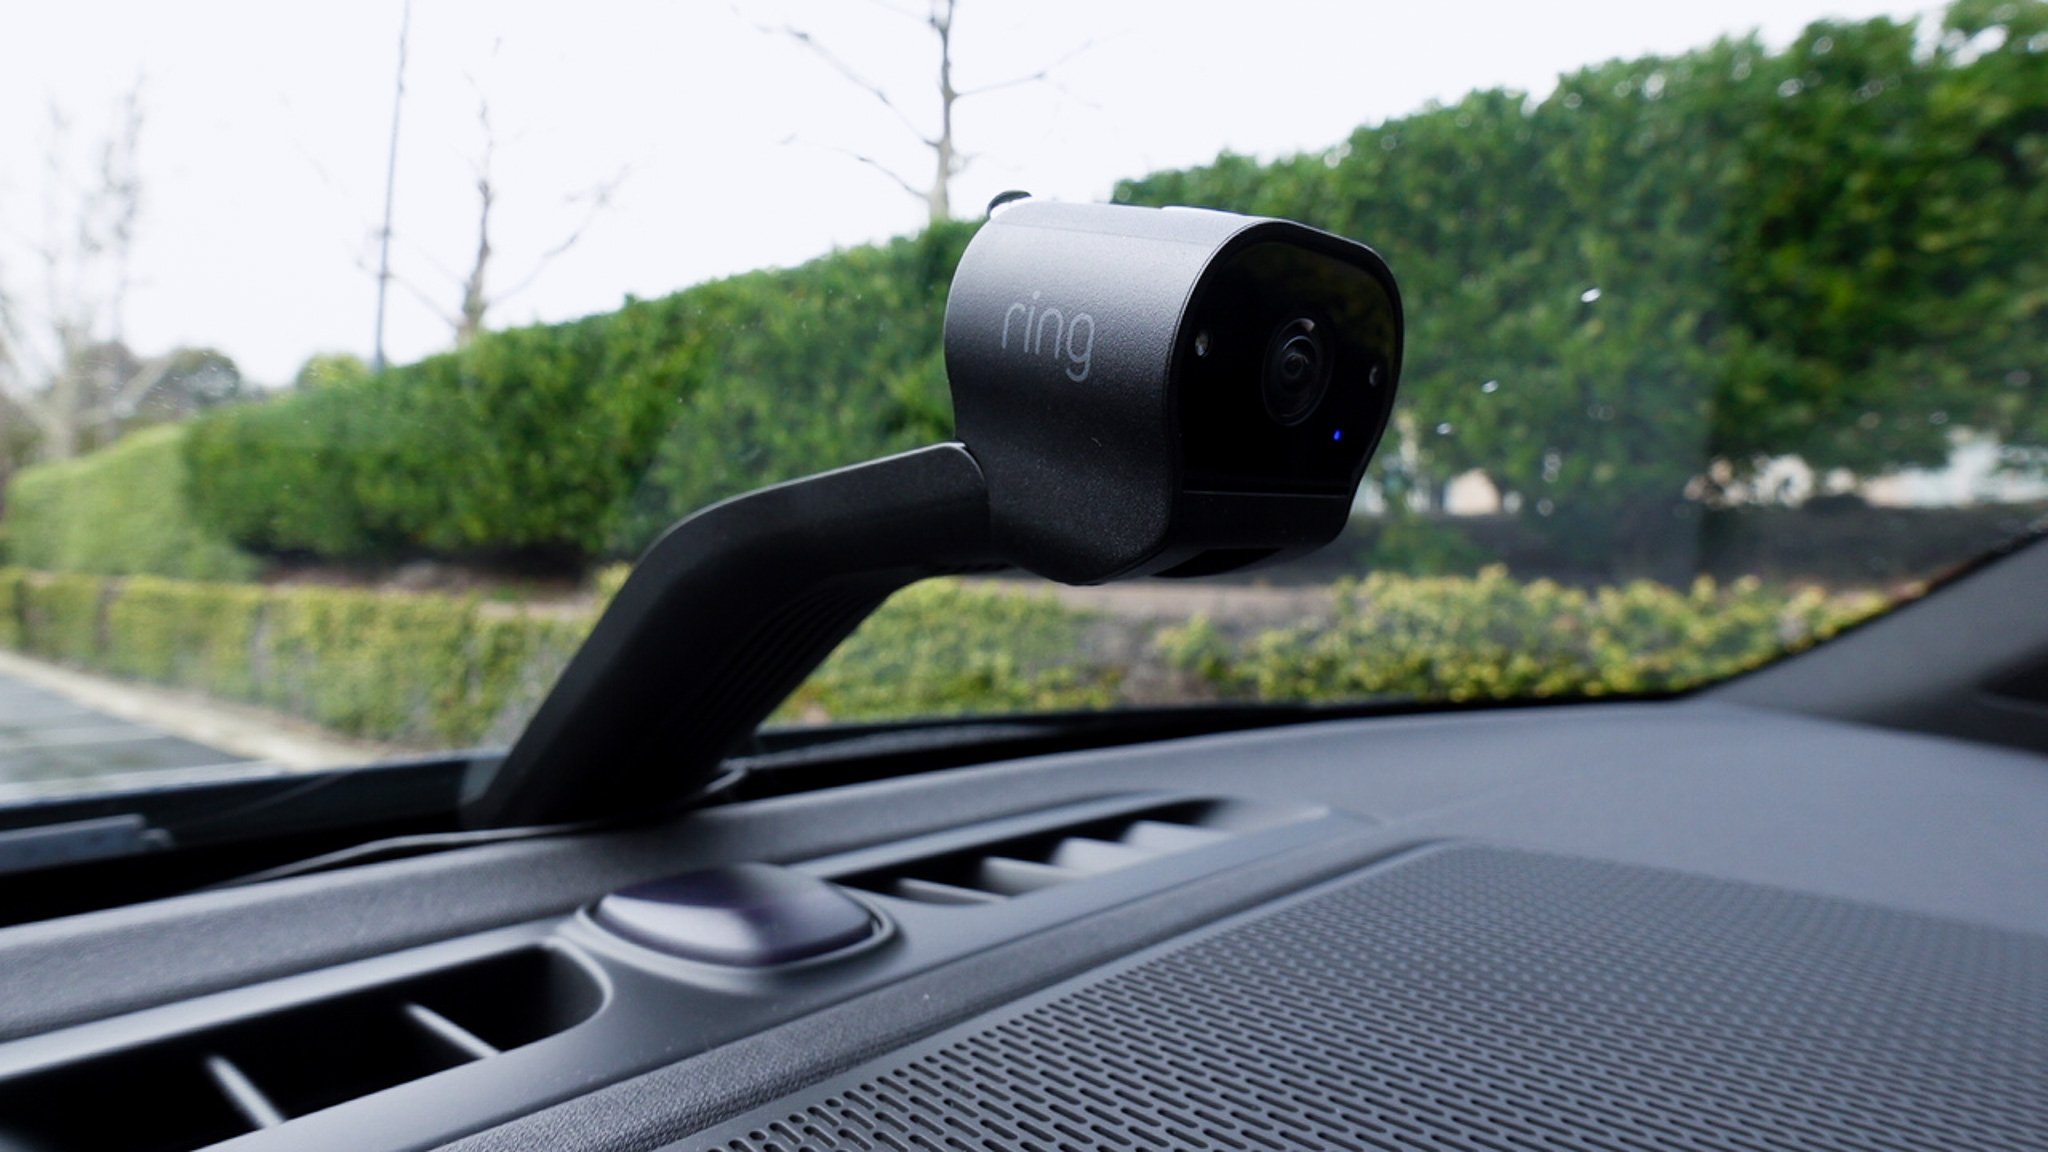 Ring Car Cam Review: Perfect for the Polestar 2? — Sypnotix